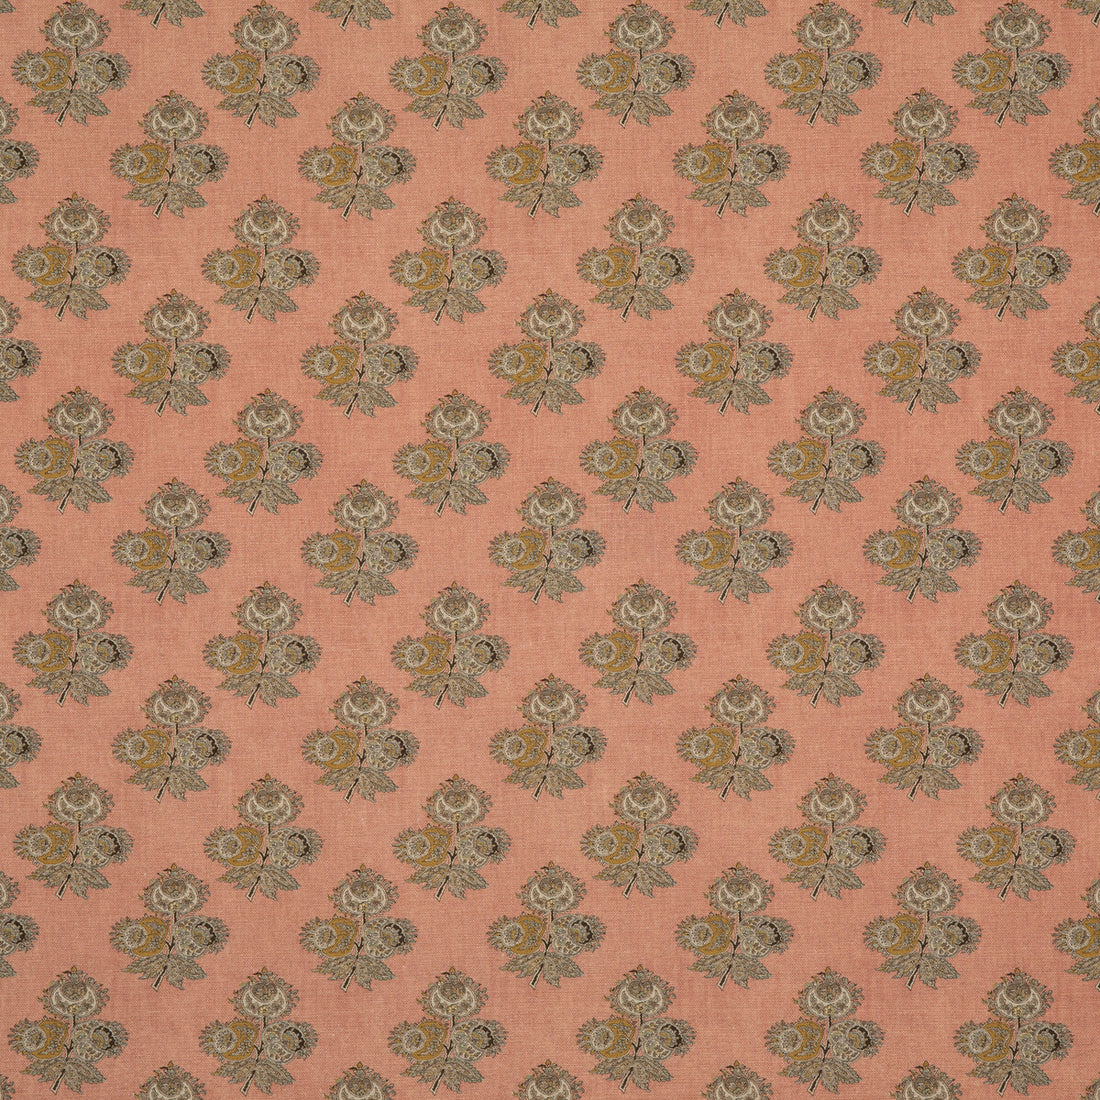 Poppy Paisley fabric in blush color - pattern BP10823.4.0 - by G P &amp; J Baker in the Coromandel Small Prints collection